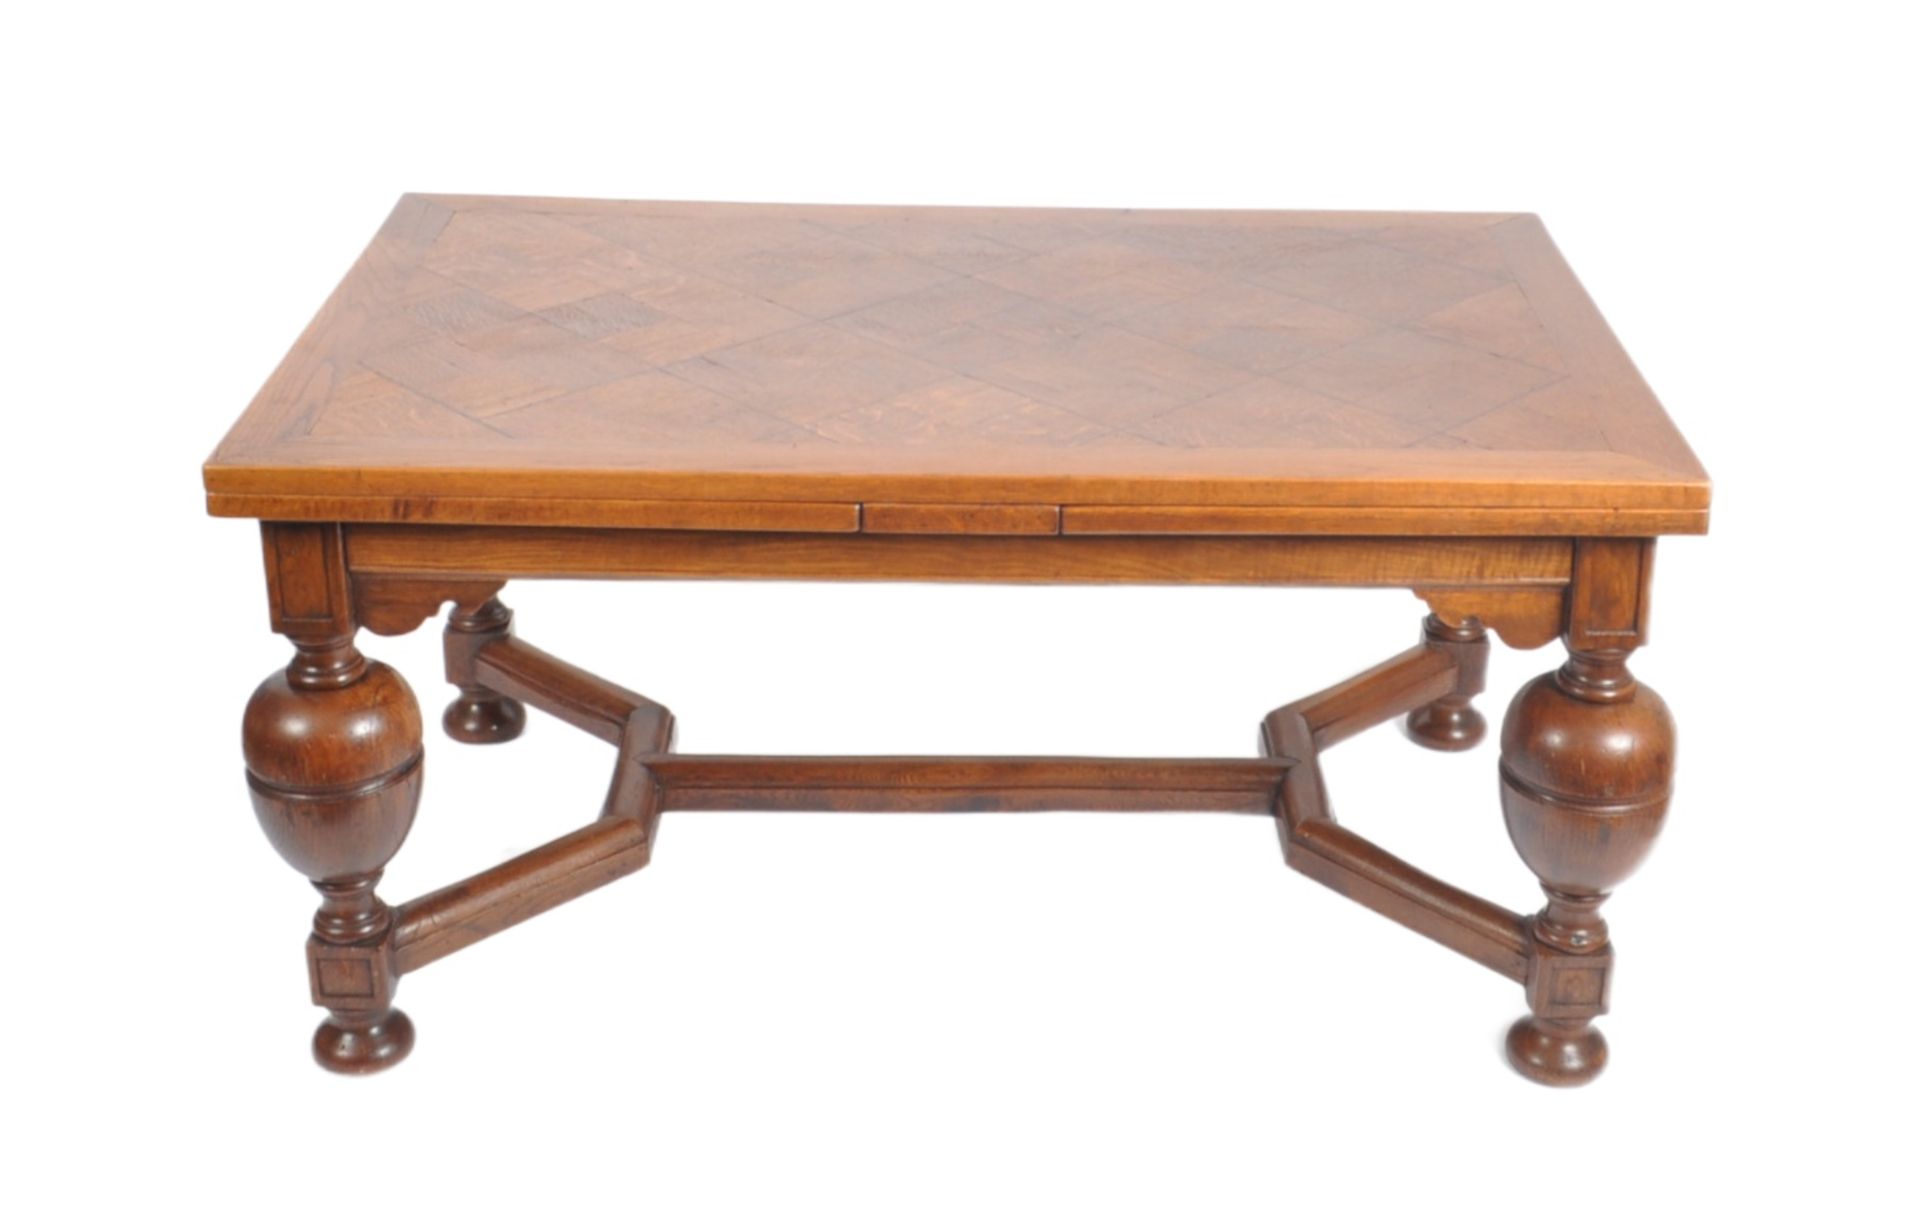 LARGE PARQUETRY INLAID REFECTORY DINING TABLE - RUBENS